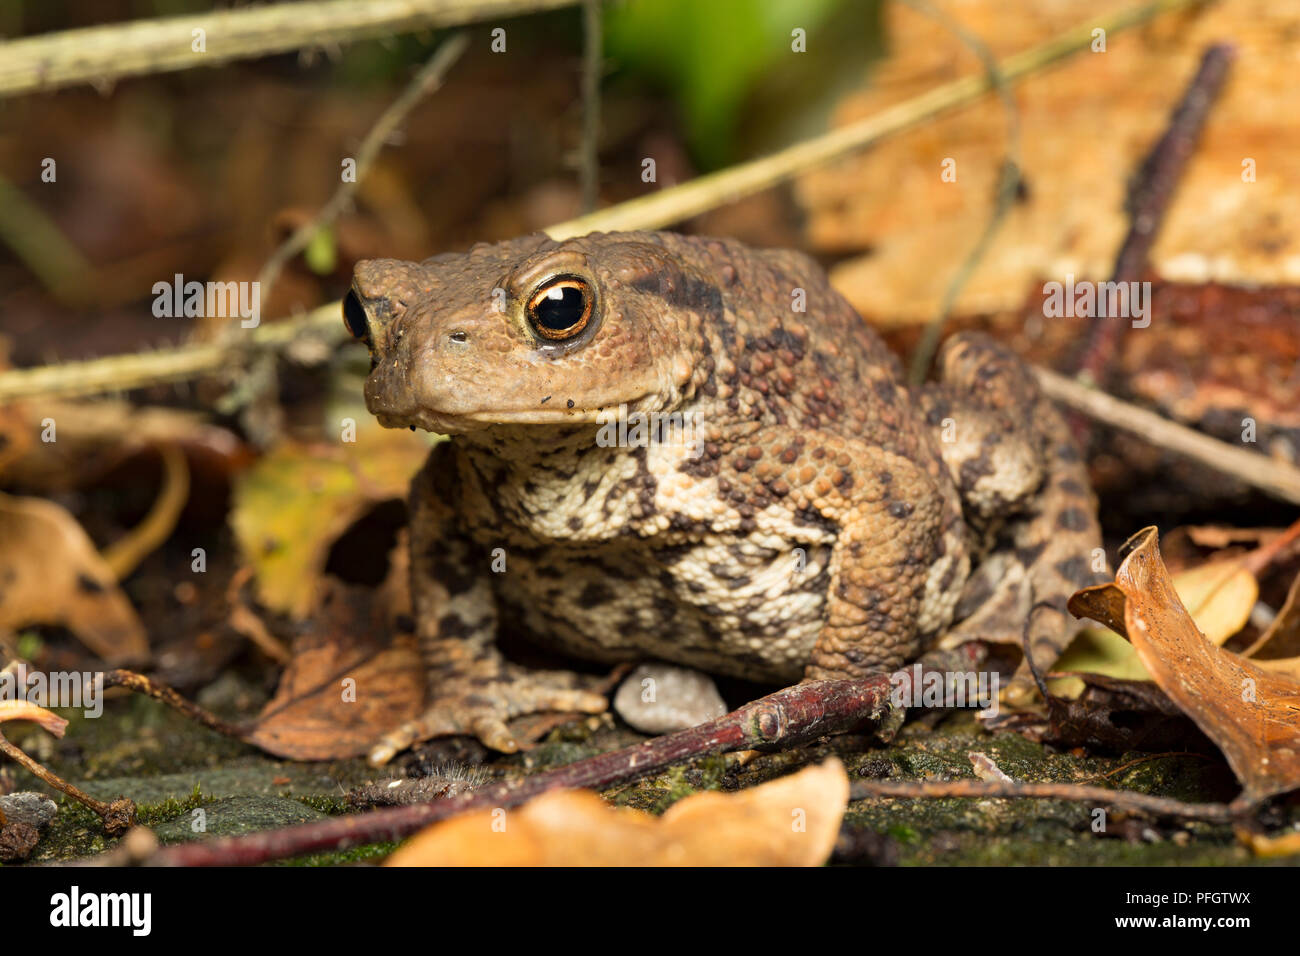 A common or european toad, Bufo bufo, behind a garage photographed at night in a garden in Lancashire North West England UK GB Stock Photo